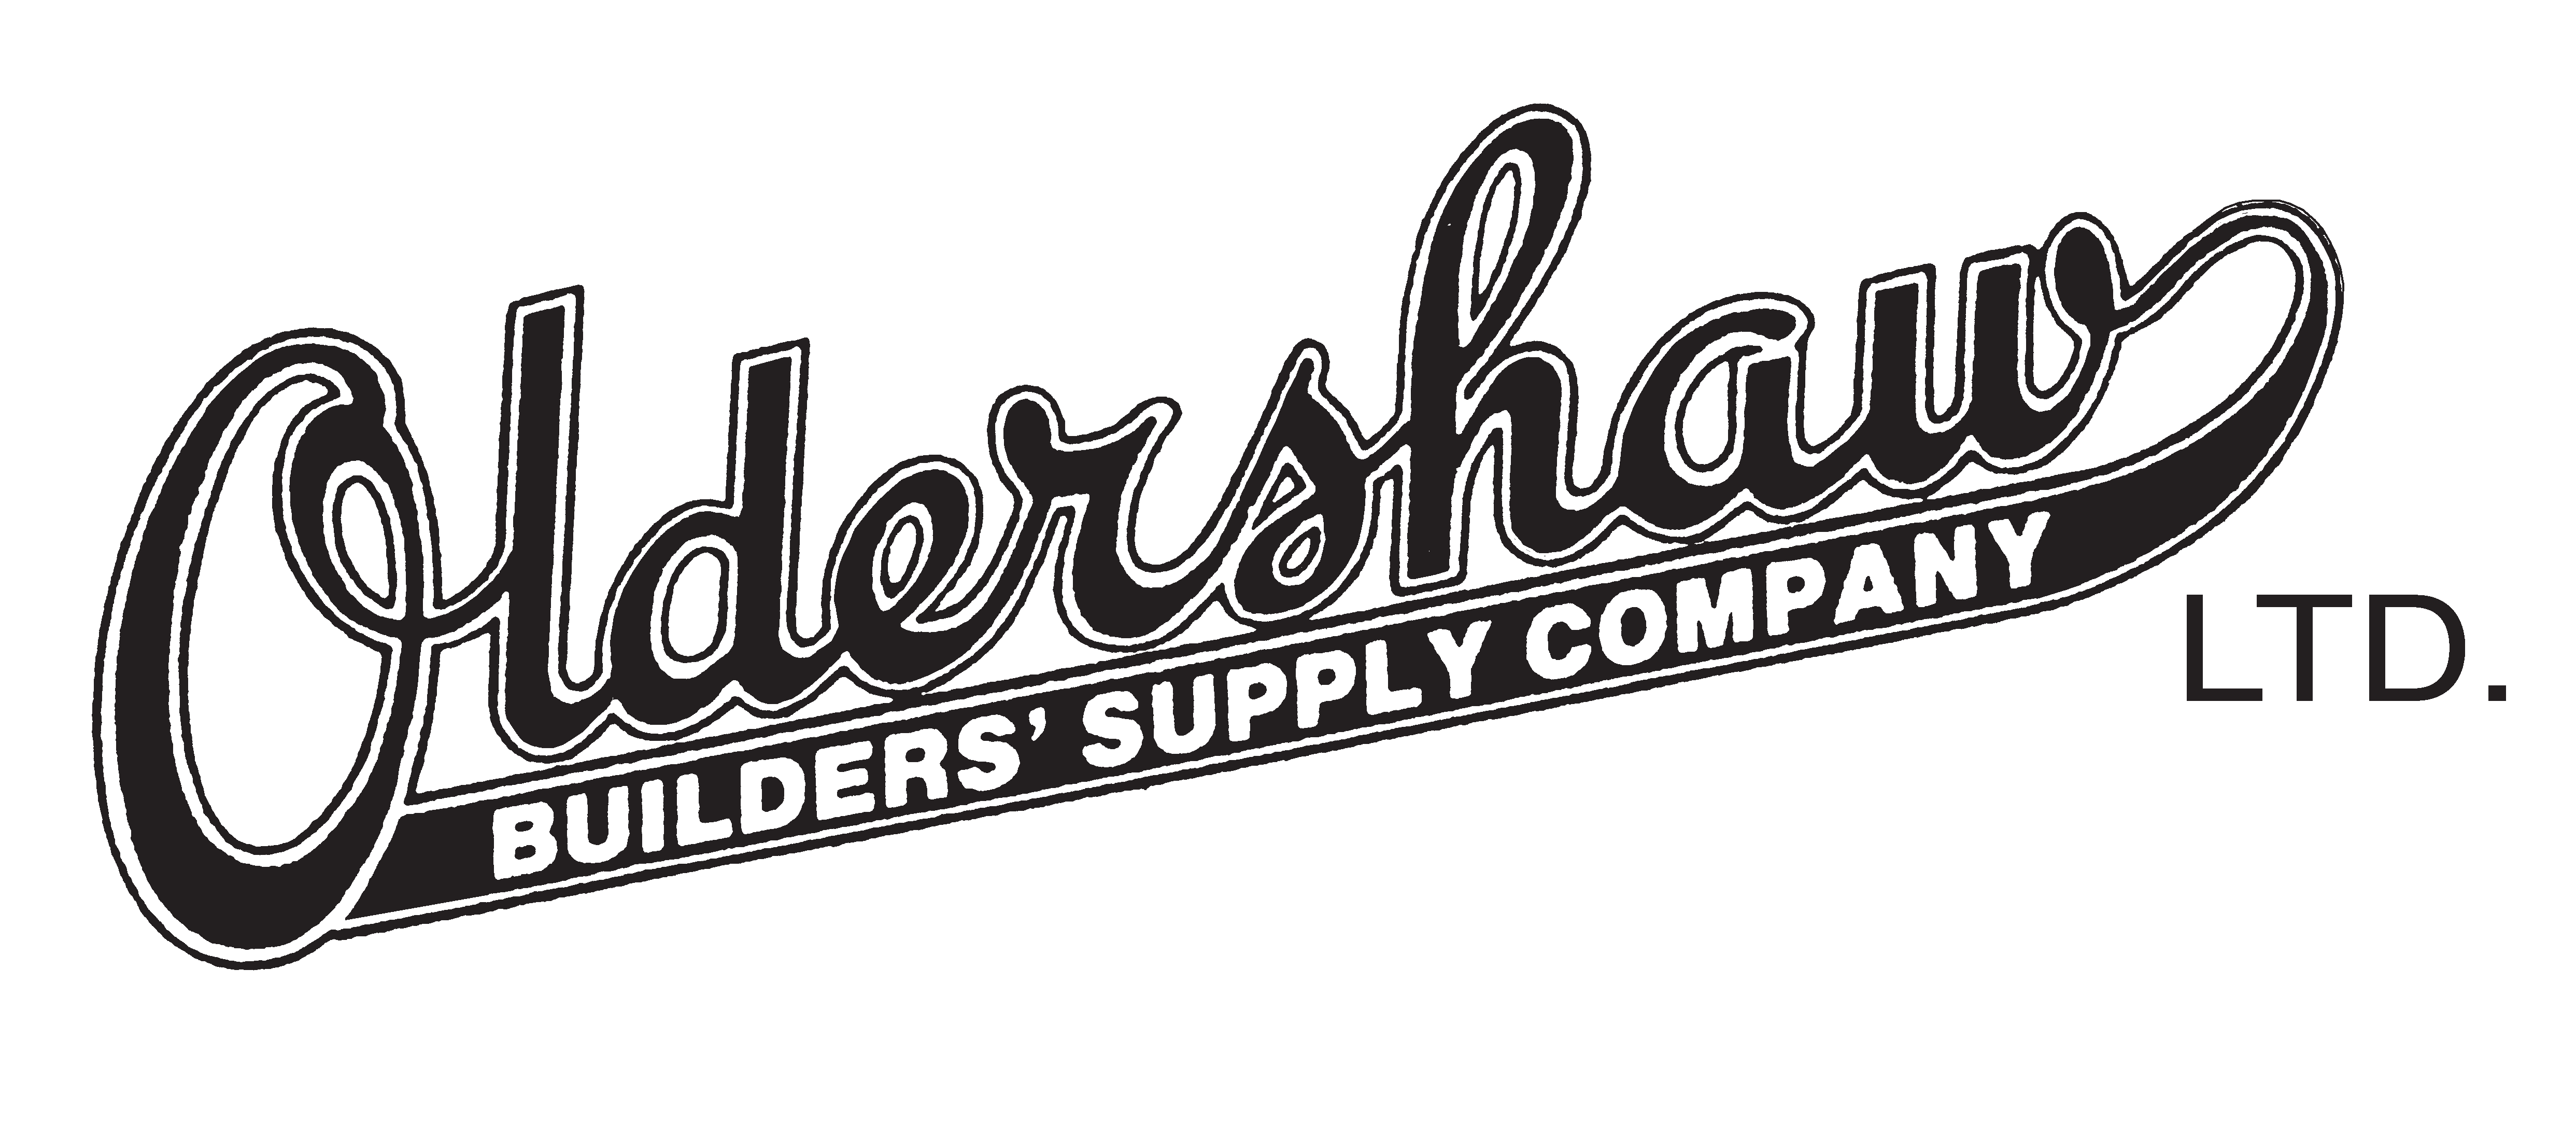 Oldershaw Builder’s Supply - A division of Yvon Building Supply